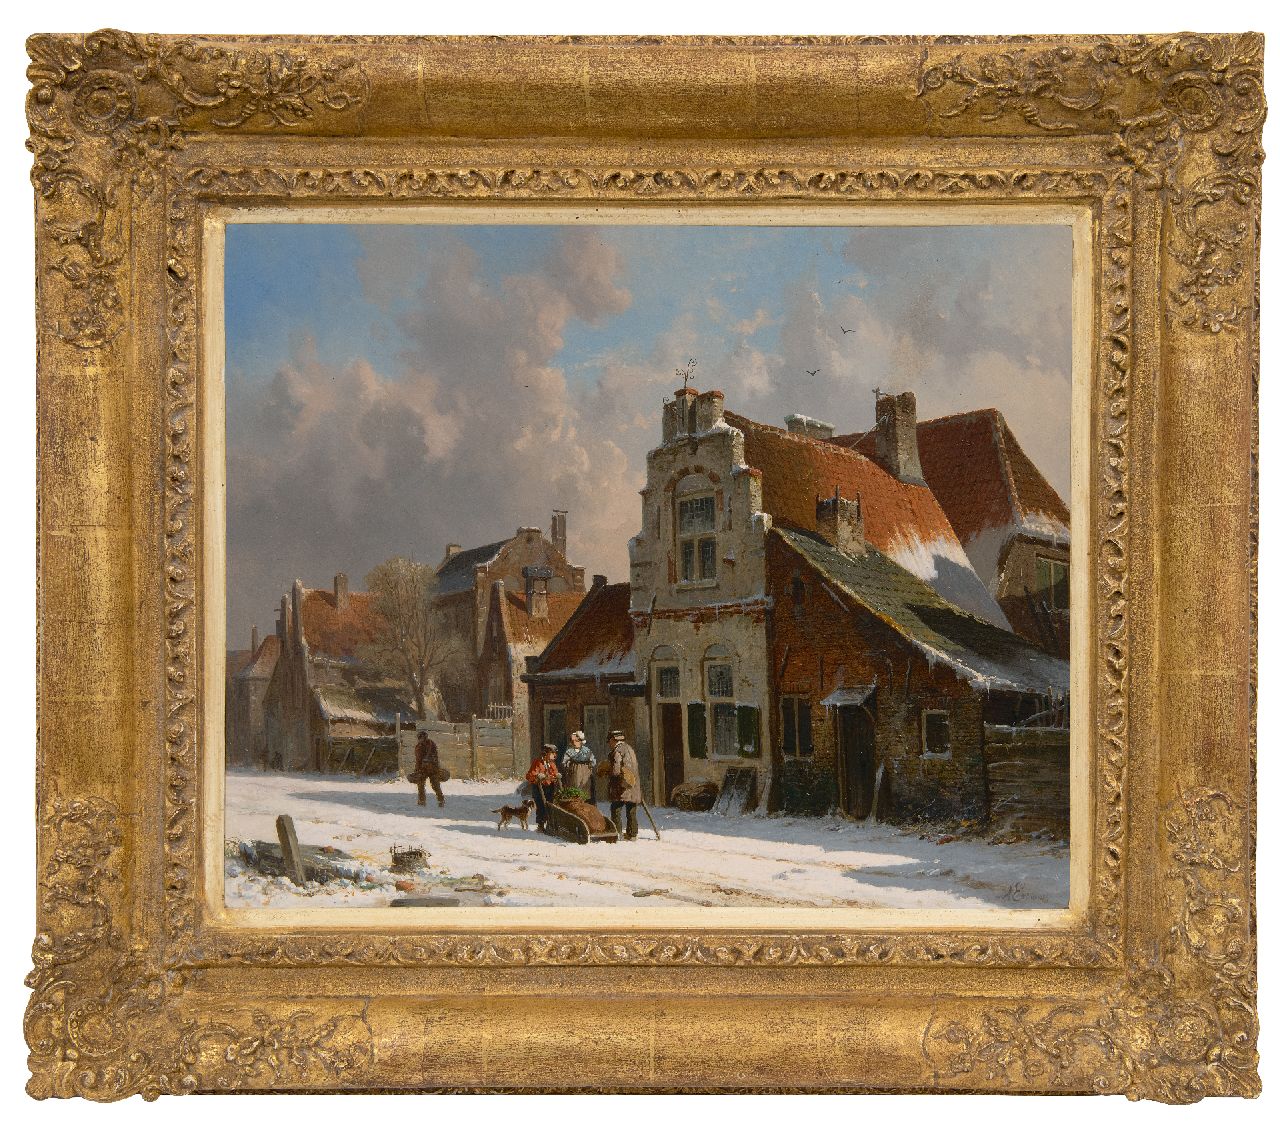 Eversen A.  | Adrianus Eversen | Paintings offered for sale | Encounter on a snowy road, oil on panel 33.3 x 41.4 cm, signed l.r. in full and with Monogram